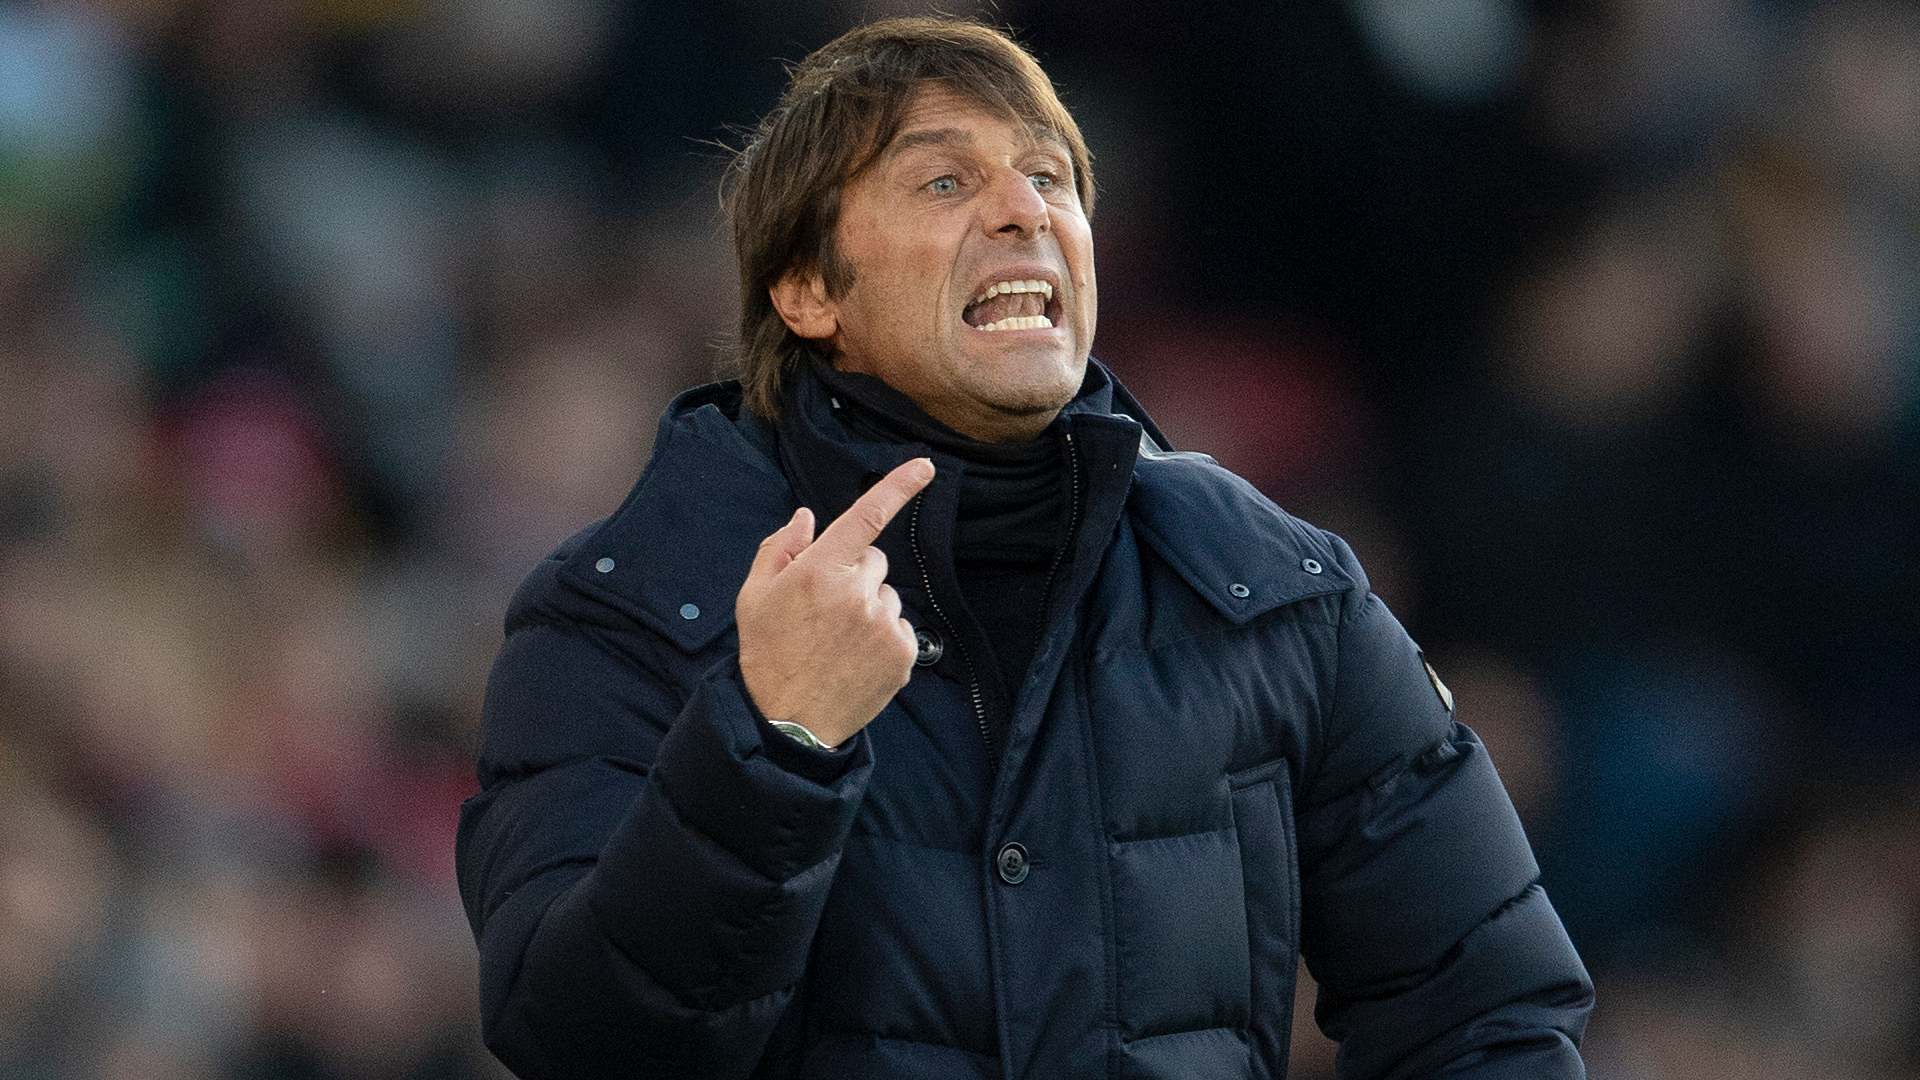 January transfer window news: Arsenal in talks with Juve, Man United want ex-Chelsea man